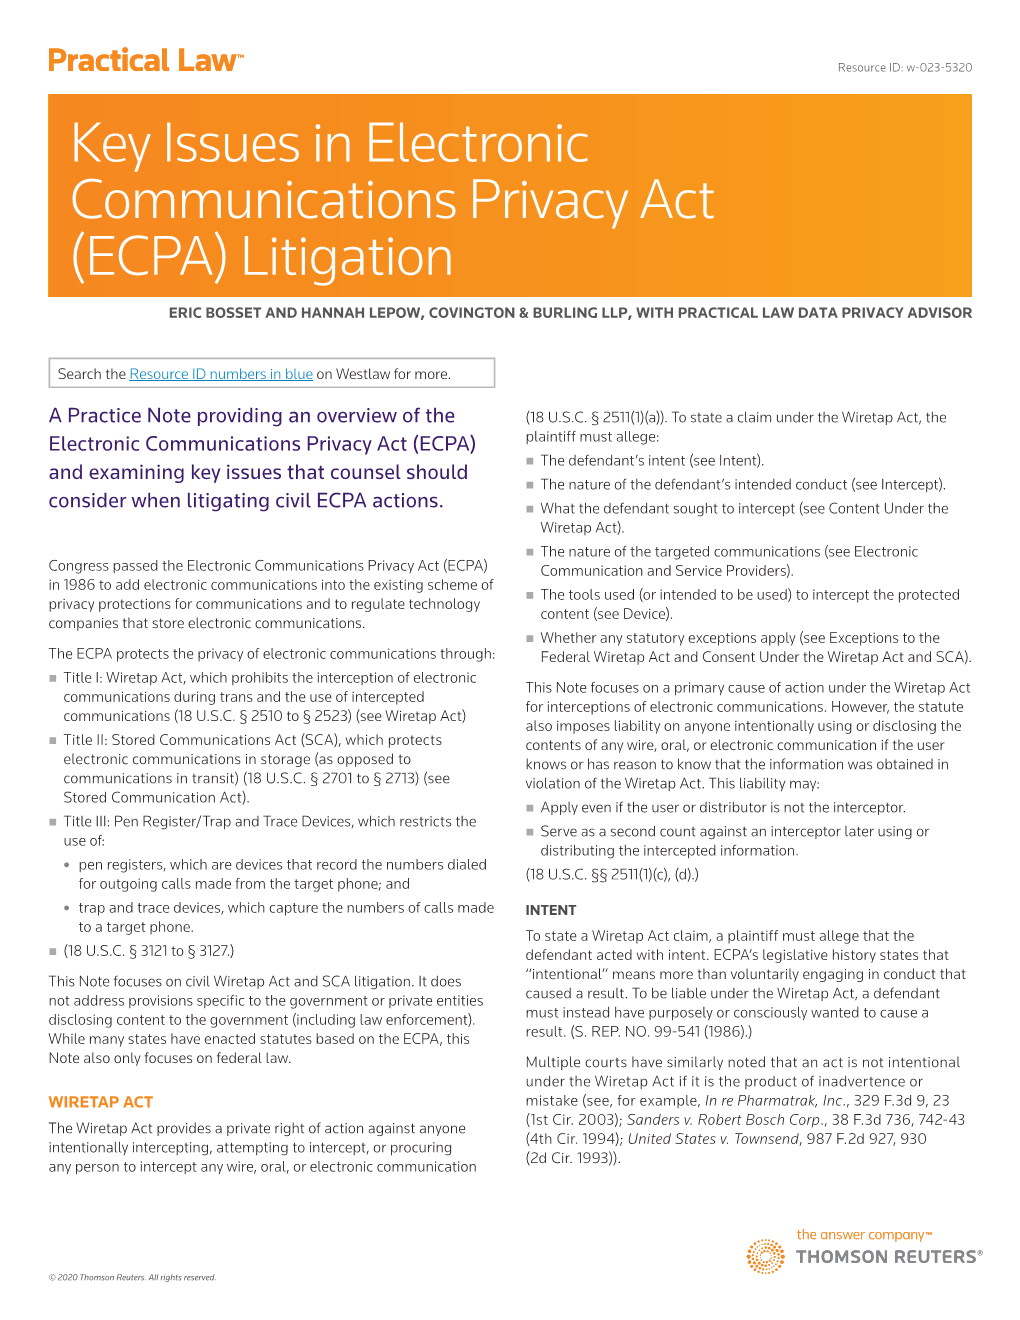 Key Issues in Electronic Communications Privacy Act (ECPA) Litigation